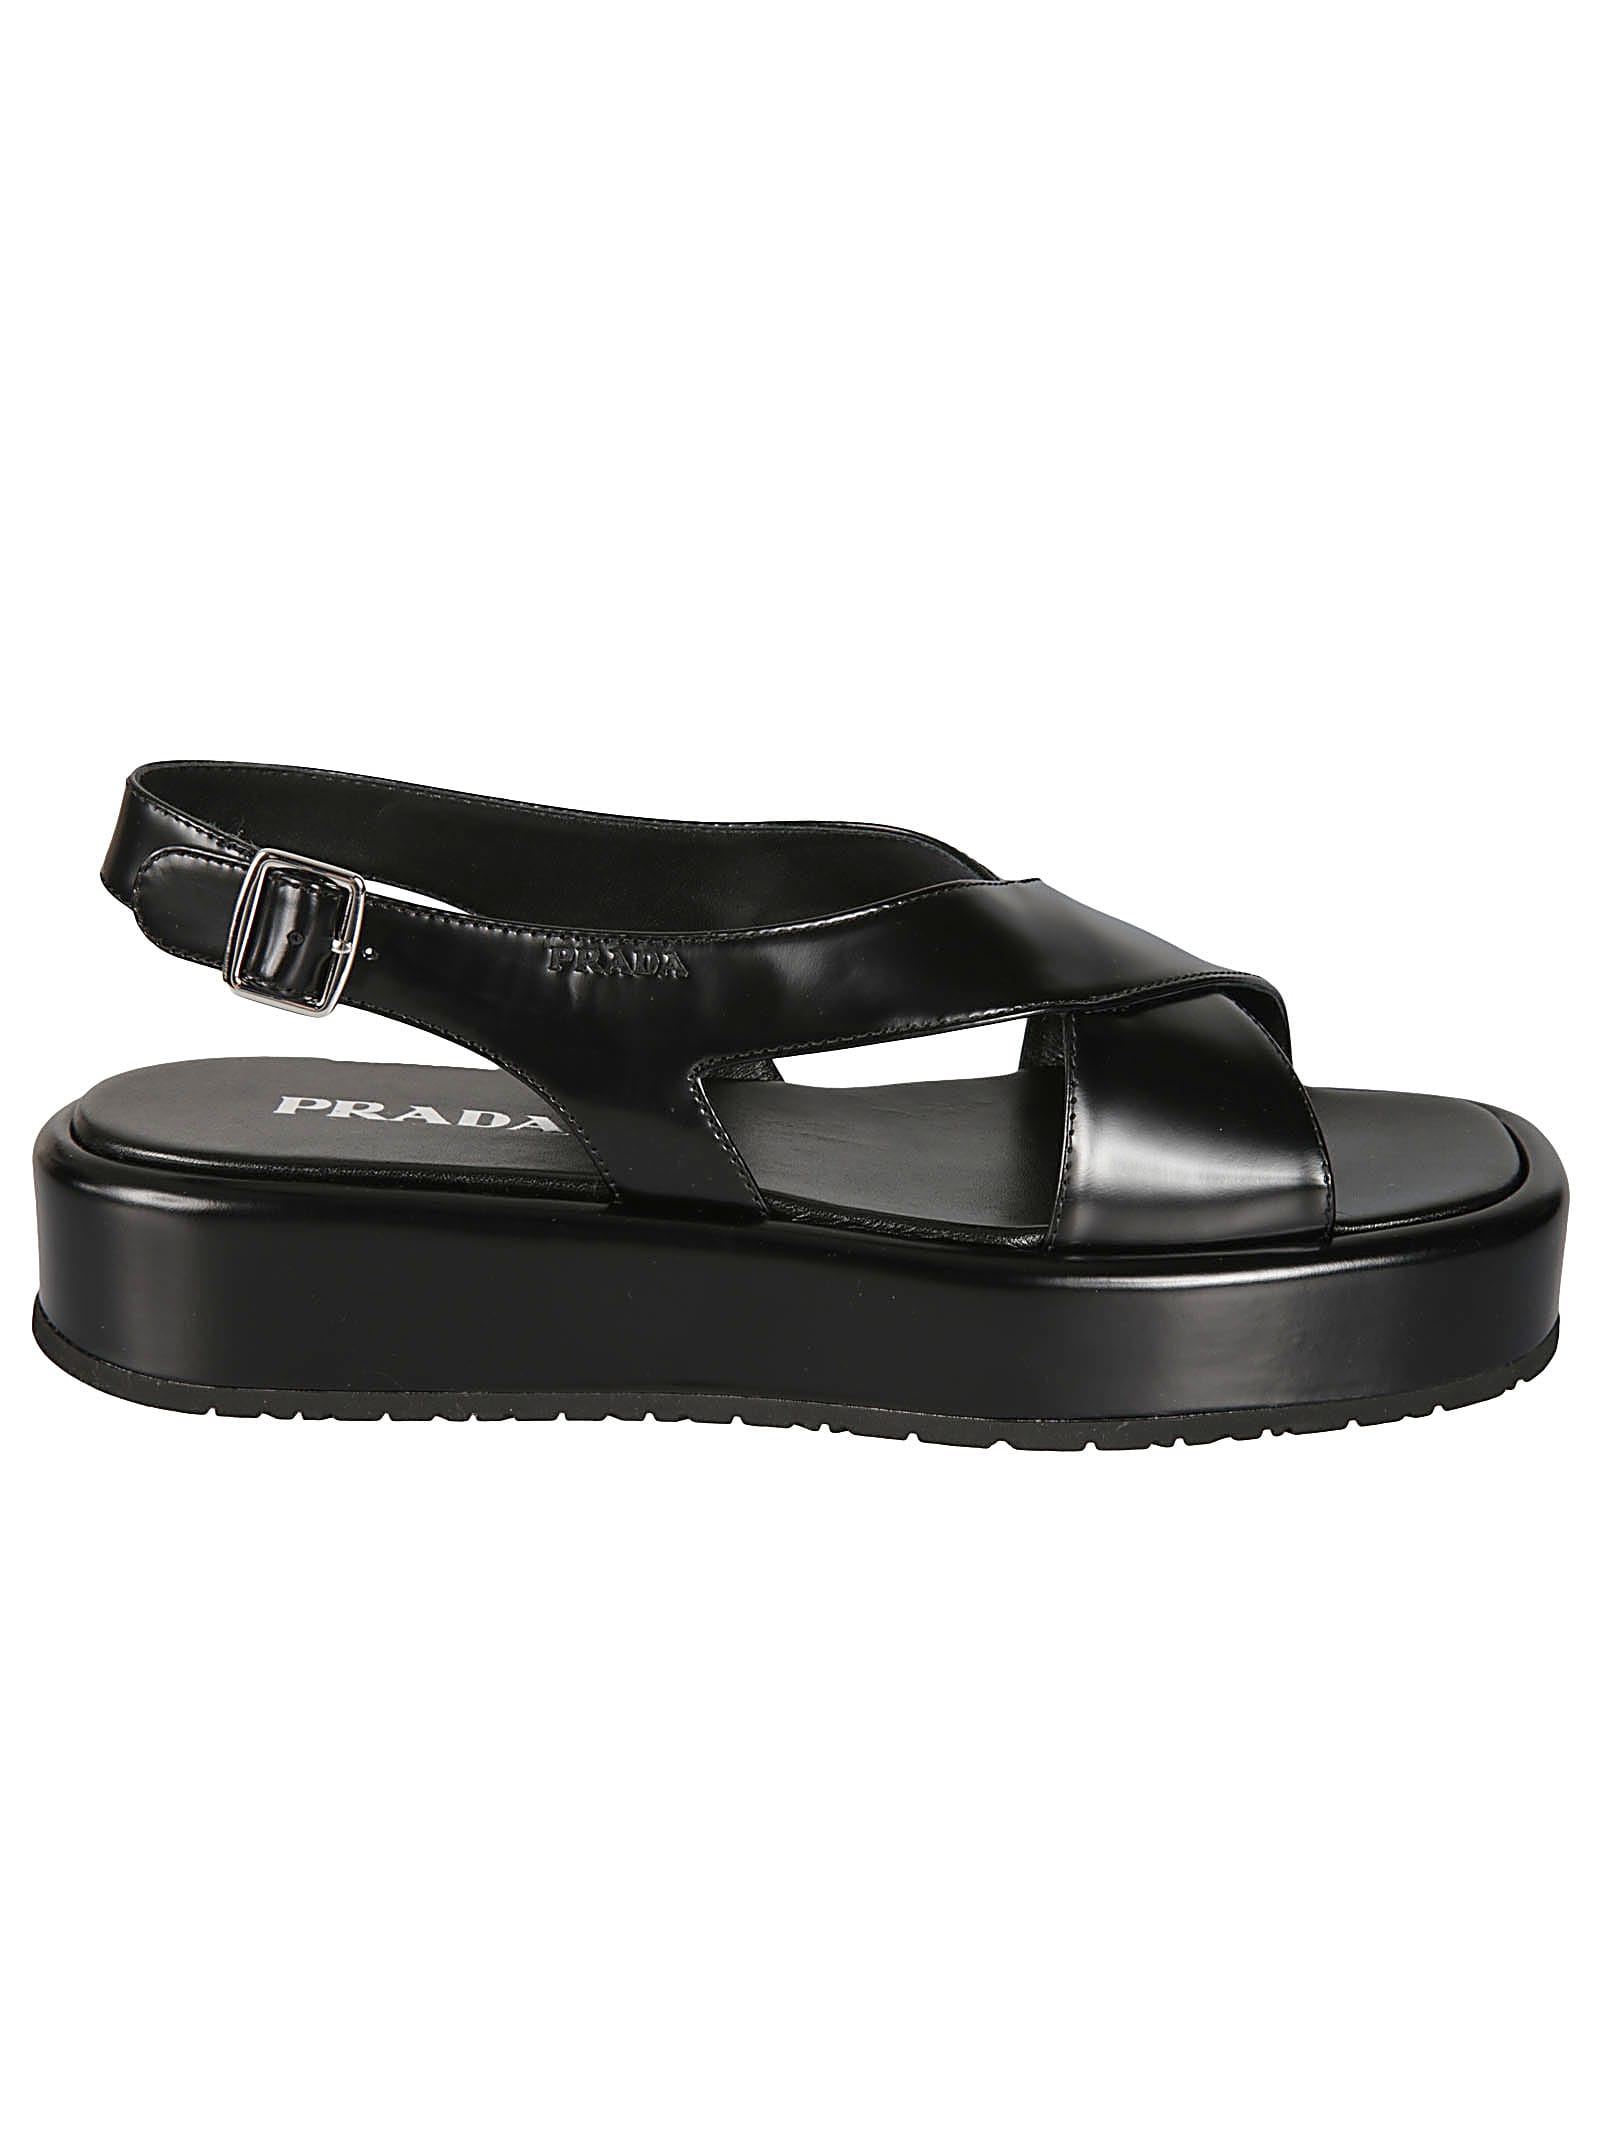 Buy Prada Side Buckle Cross Strap Sandals online, shop Prada shoes with free shipping